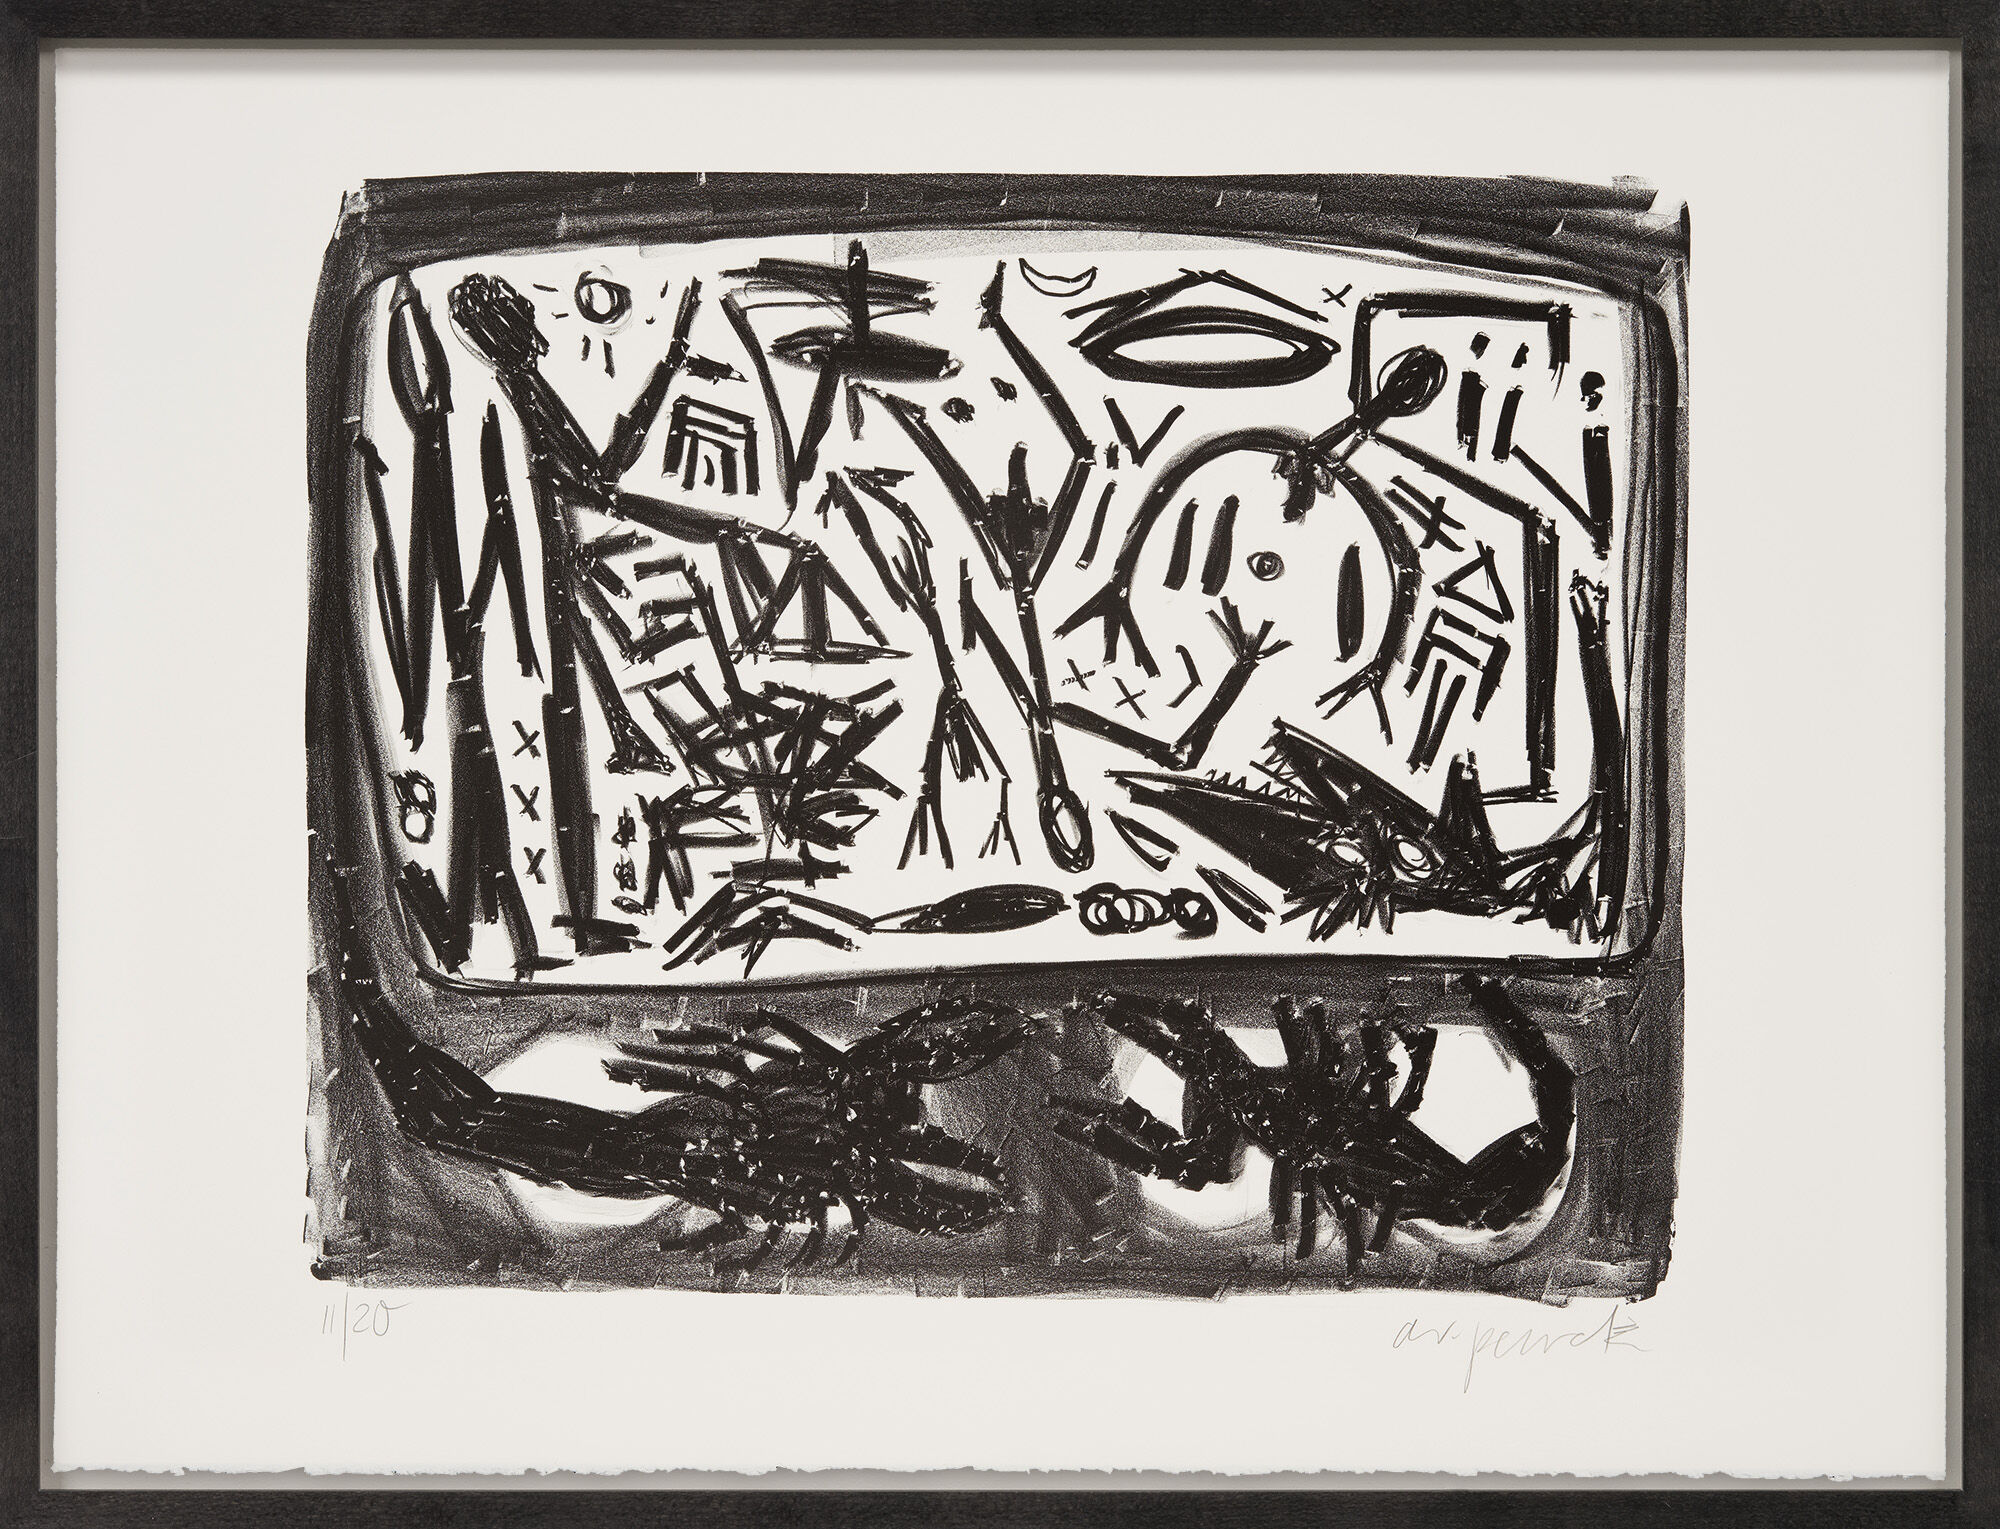 Picture "Reunification" (1990) by A. R. Penck